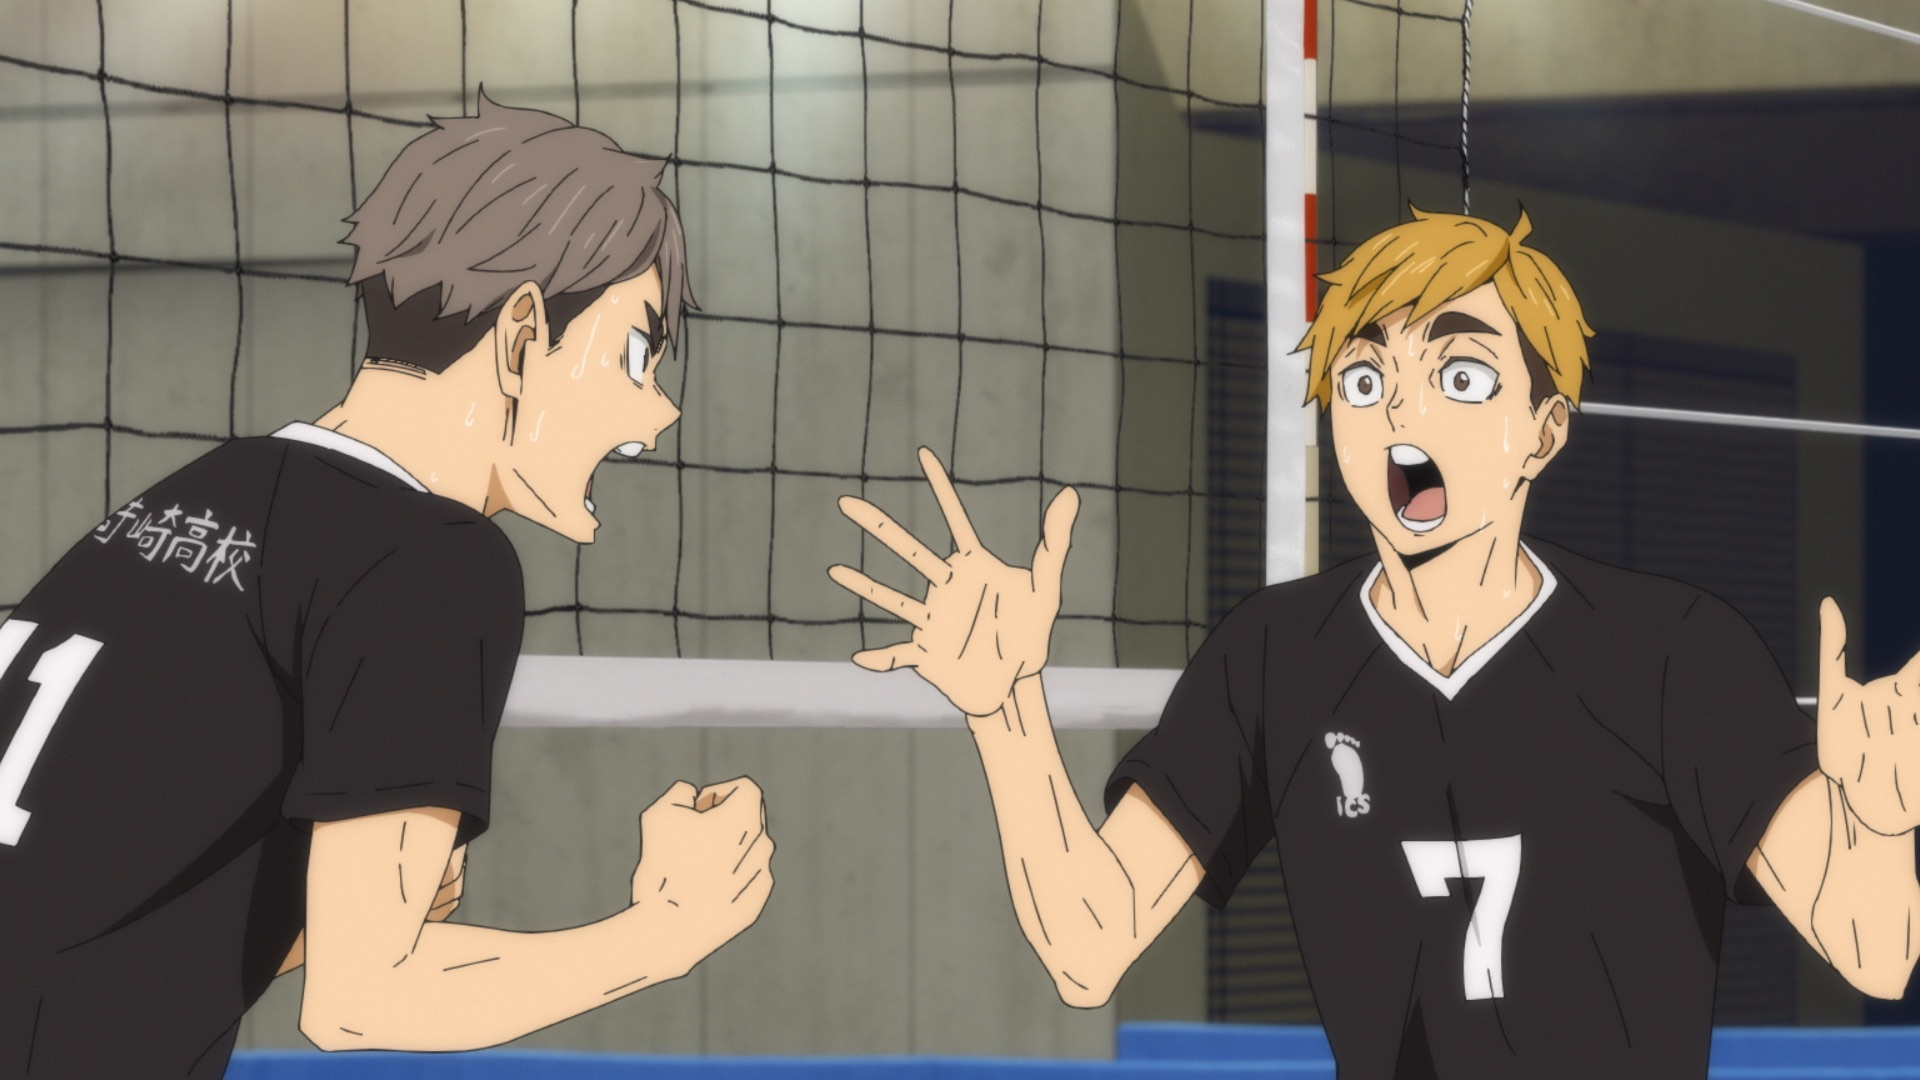 Haikyuu!! Season 5 is under discussion, why Season 4 part 2 is